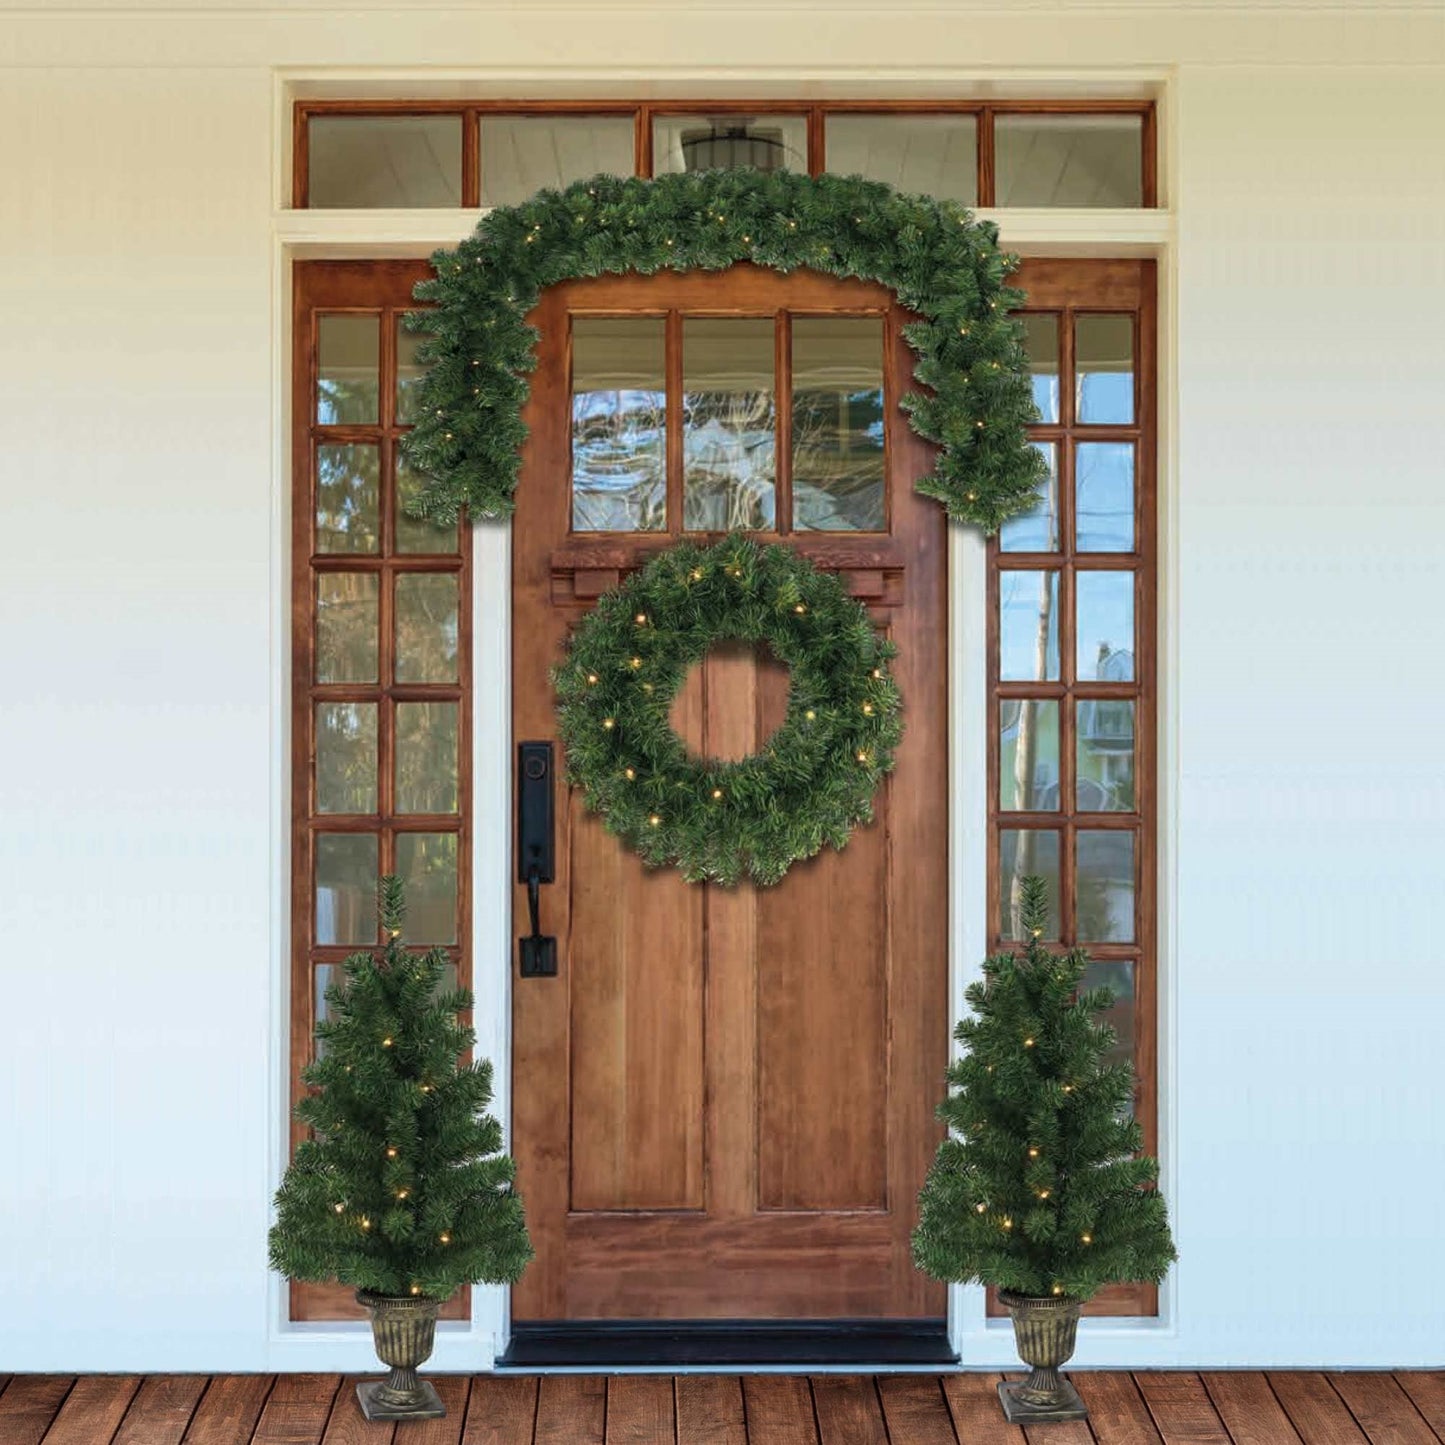 Christmas Sparkle Luxury Regal Prelit Porch Set 4 Piece Battery Operated - contains 2 x 3ft Potted Trees, 1 x 4ft Garland, 1x 40cm Wreath